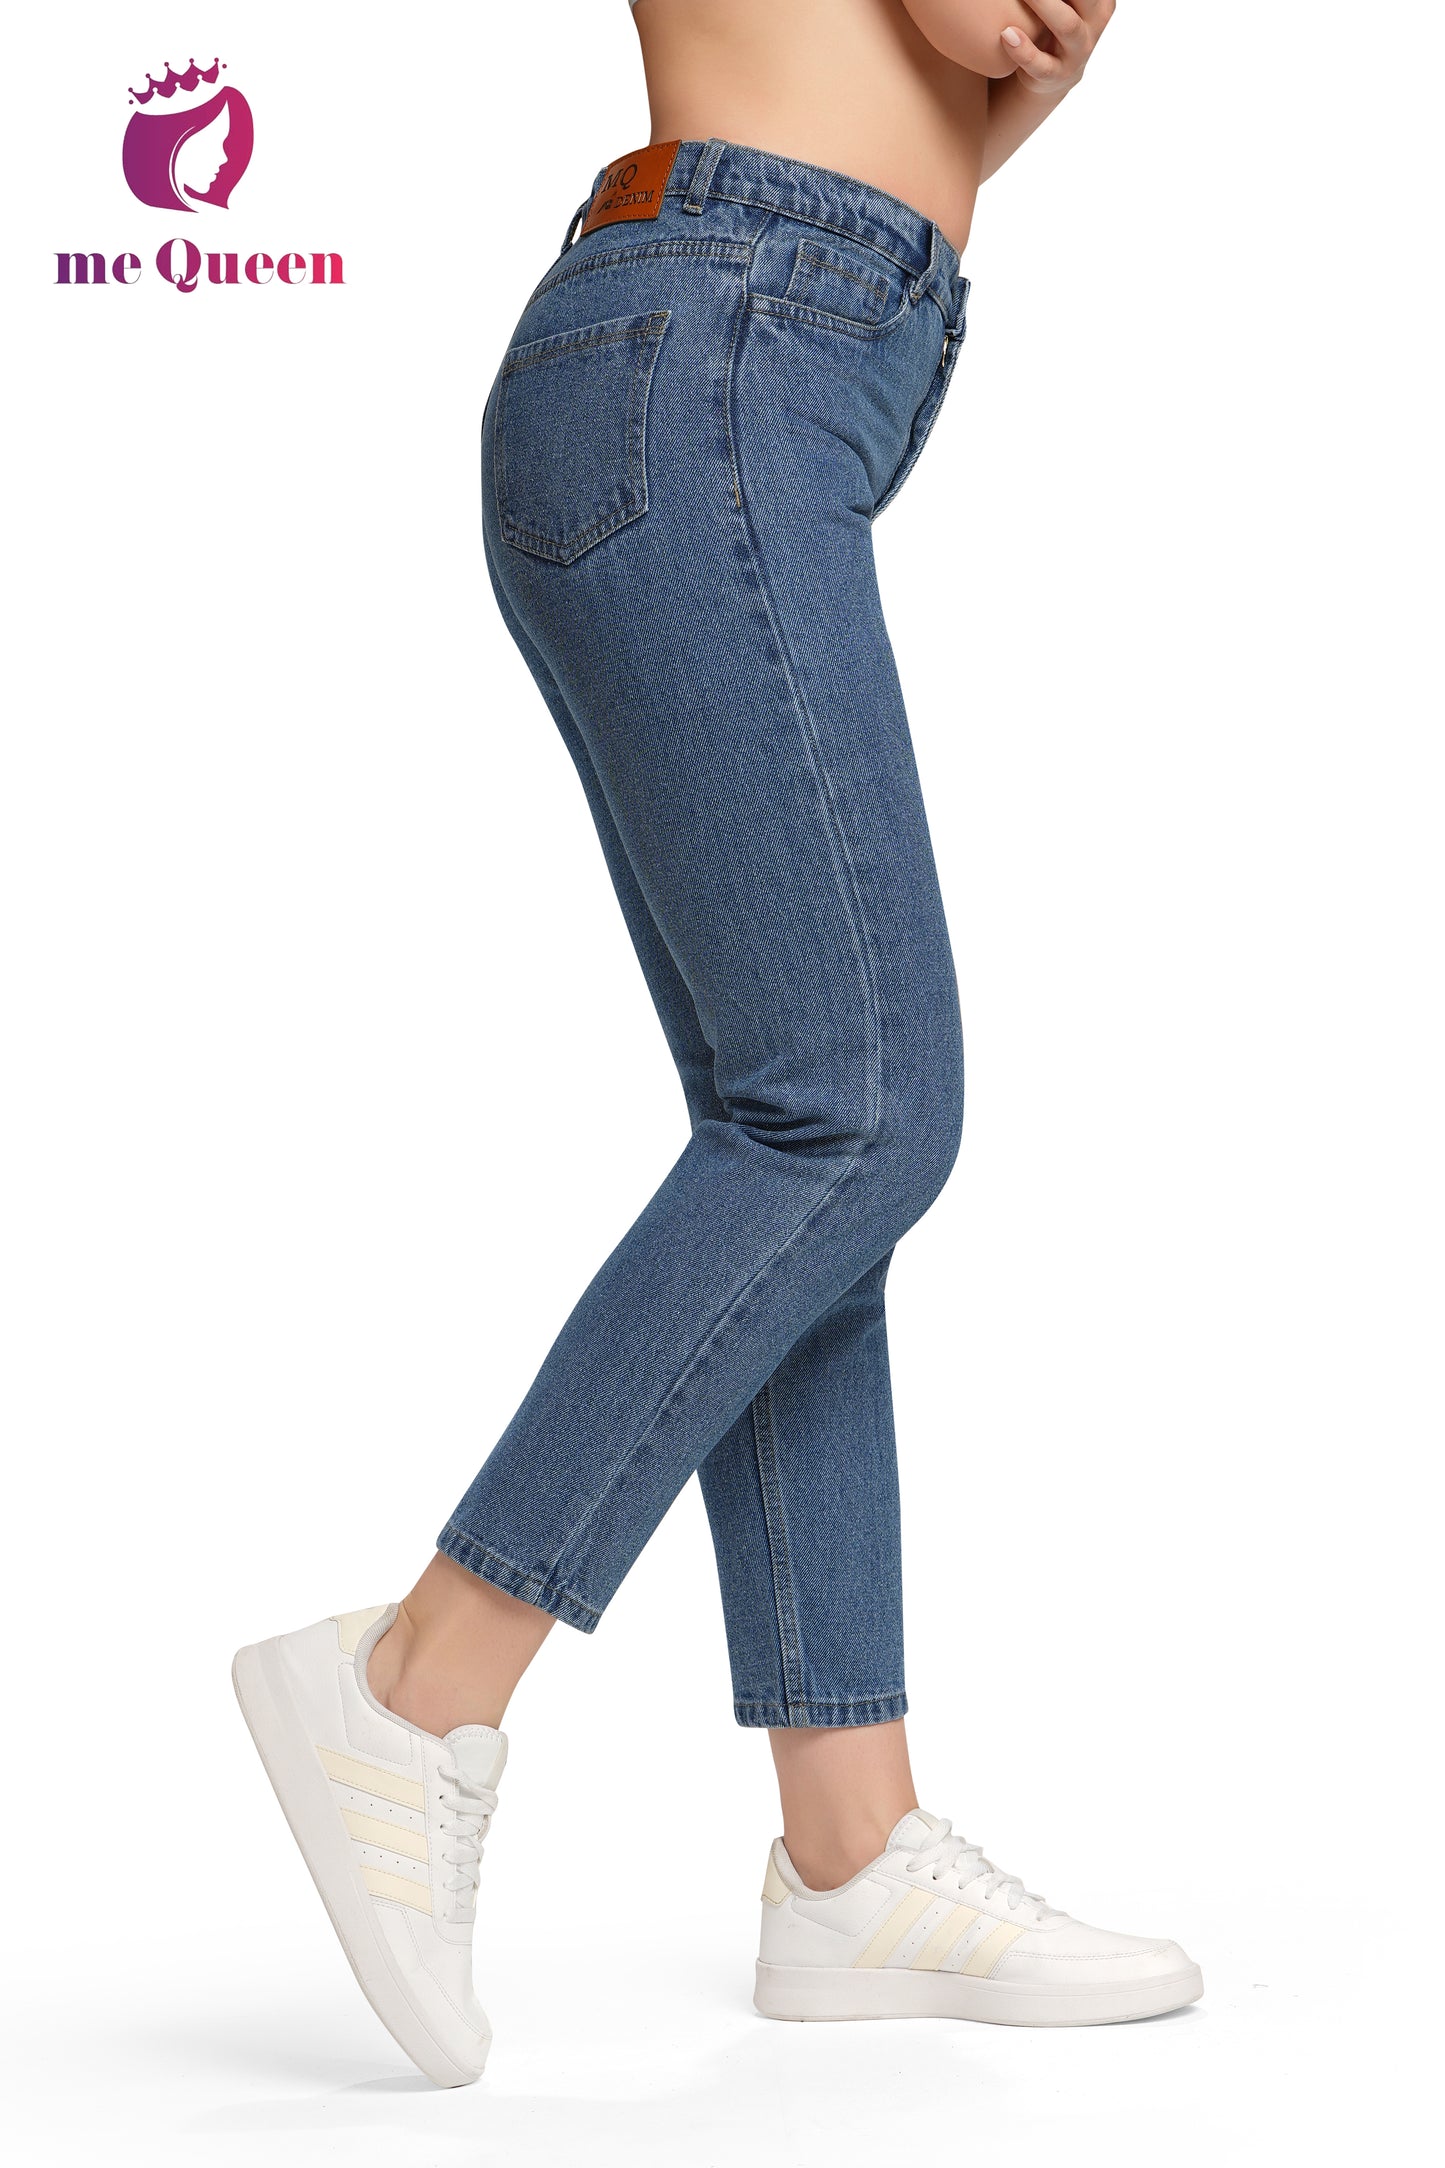 MeQueen Women's Independence Blue Fit Denim Jeans